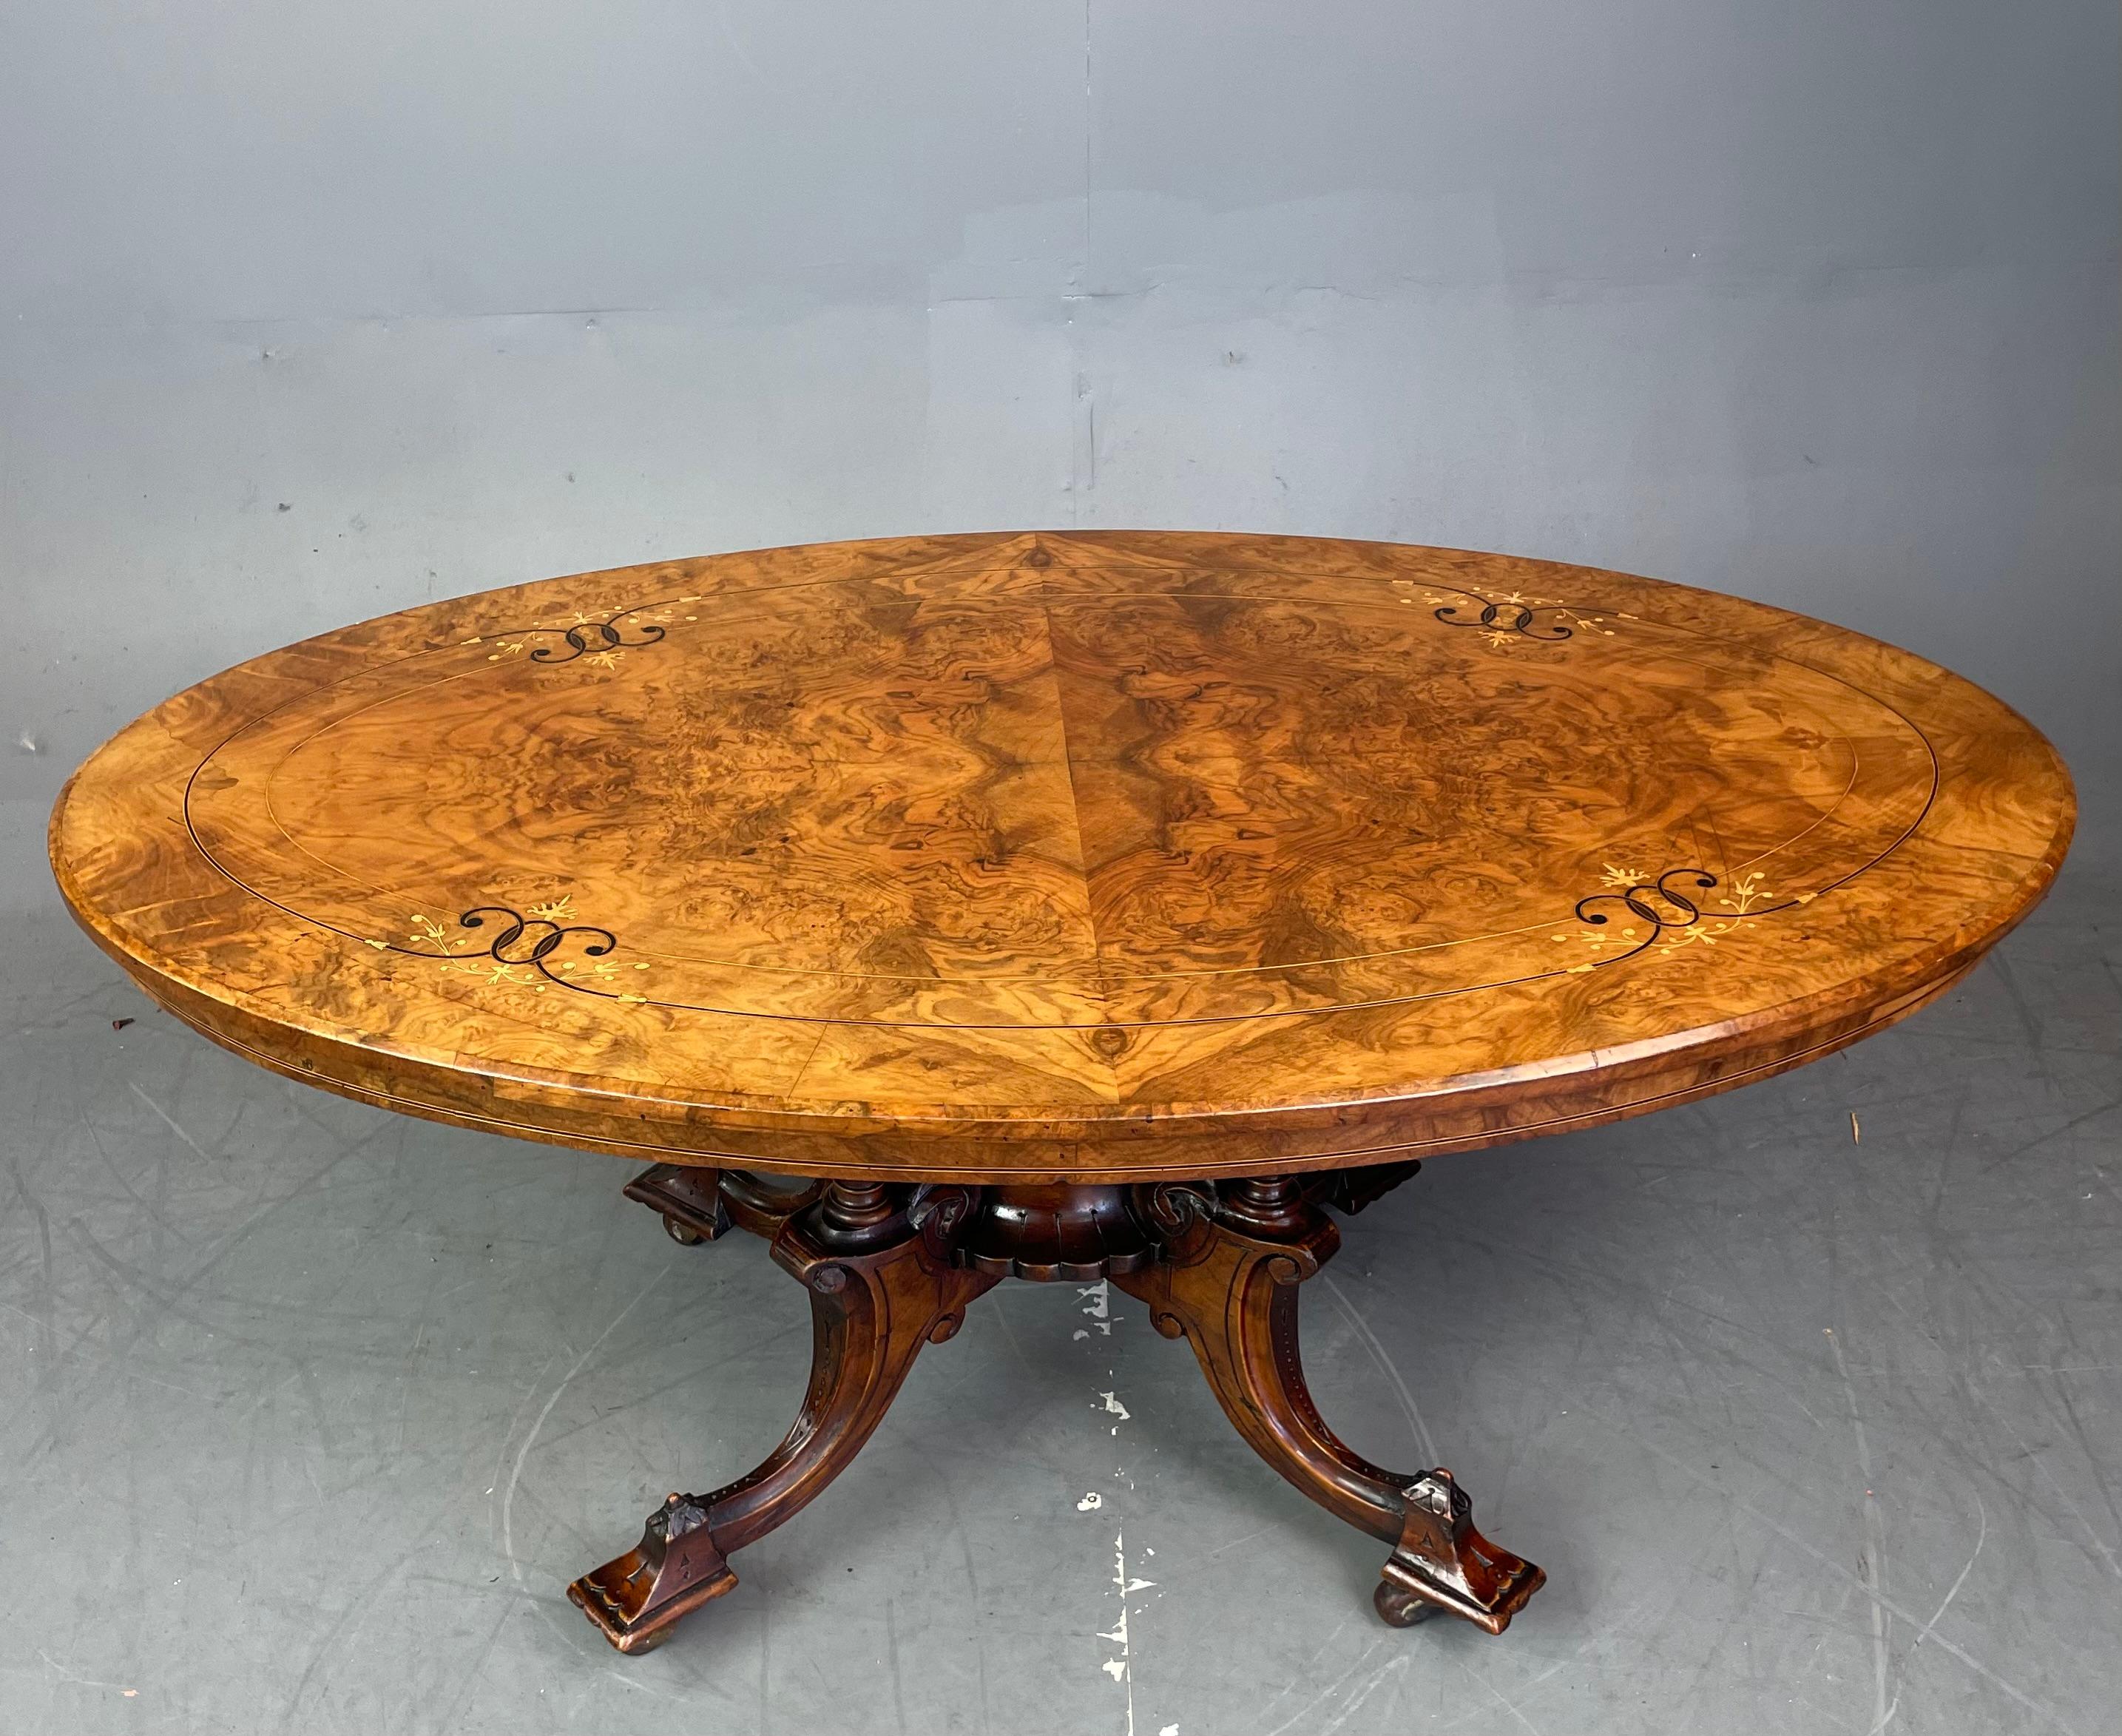 Fine quality mid Victorian coffee table circa 1870 .
The coffee table has a wonderful inlaid burr walnut top that is a great colour and has a good grain .
Very good condition with no splits or marks ,it has been professionally cleaned and waxed